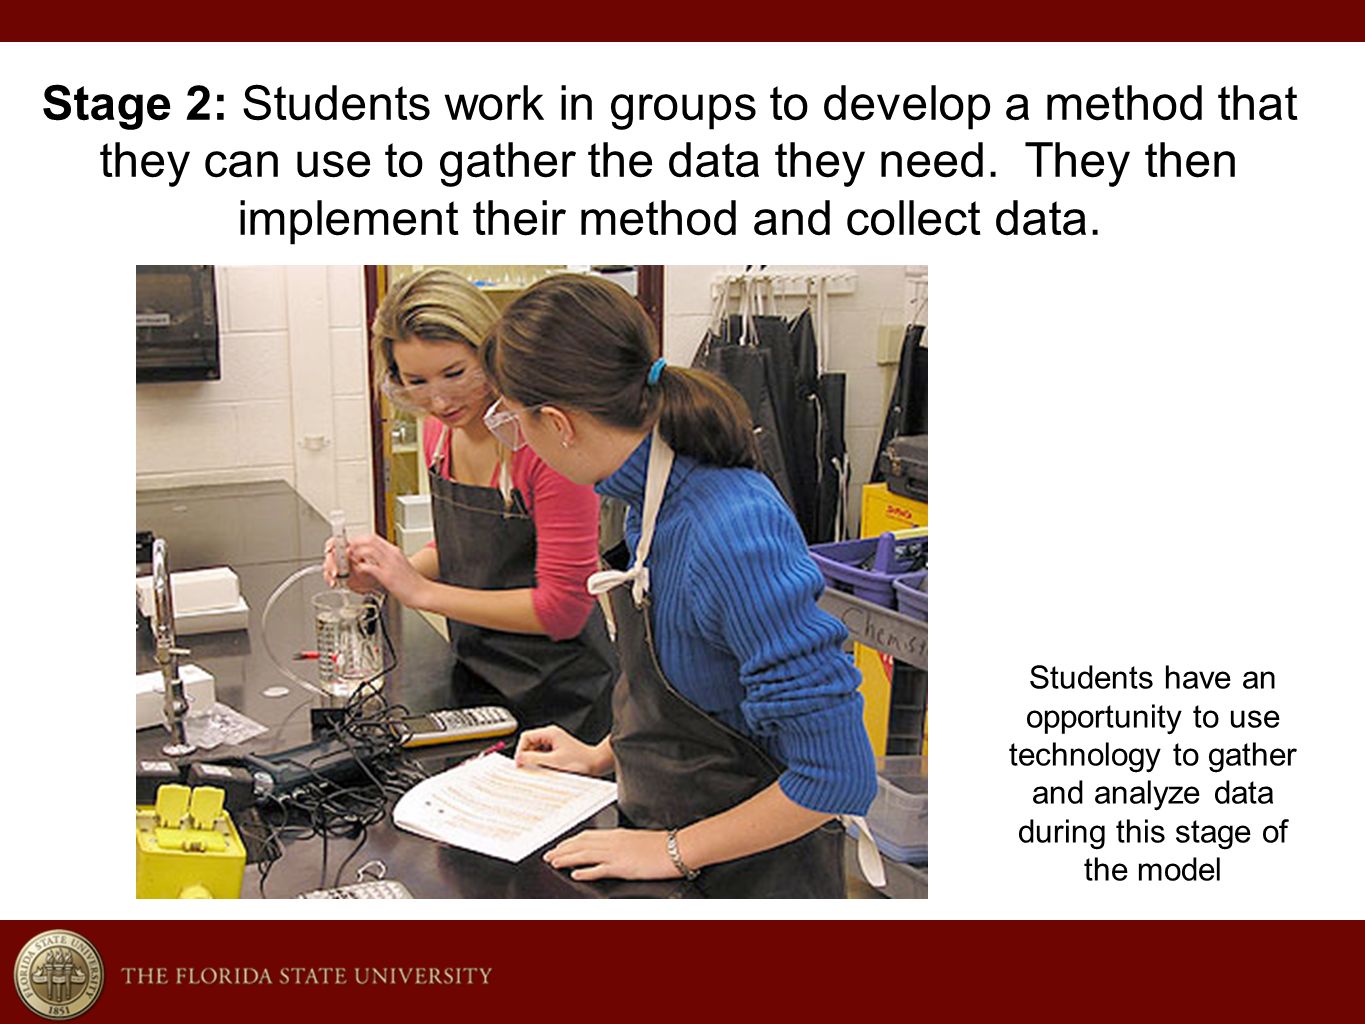 Stage 2: Students work in groups to develop a method that they can use to gather the data they need.